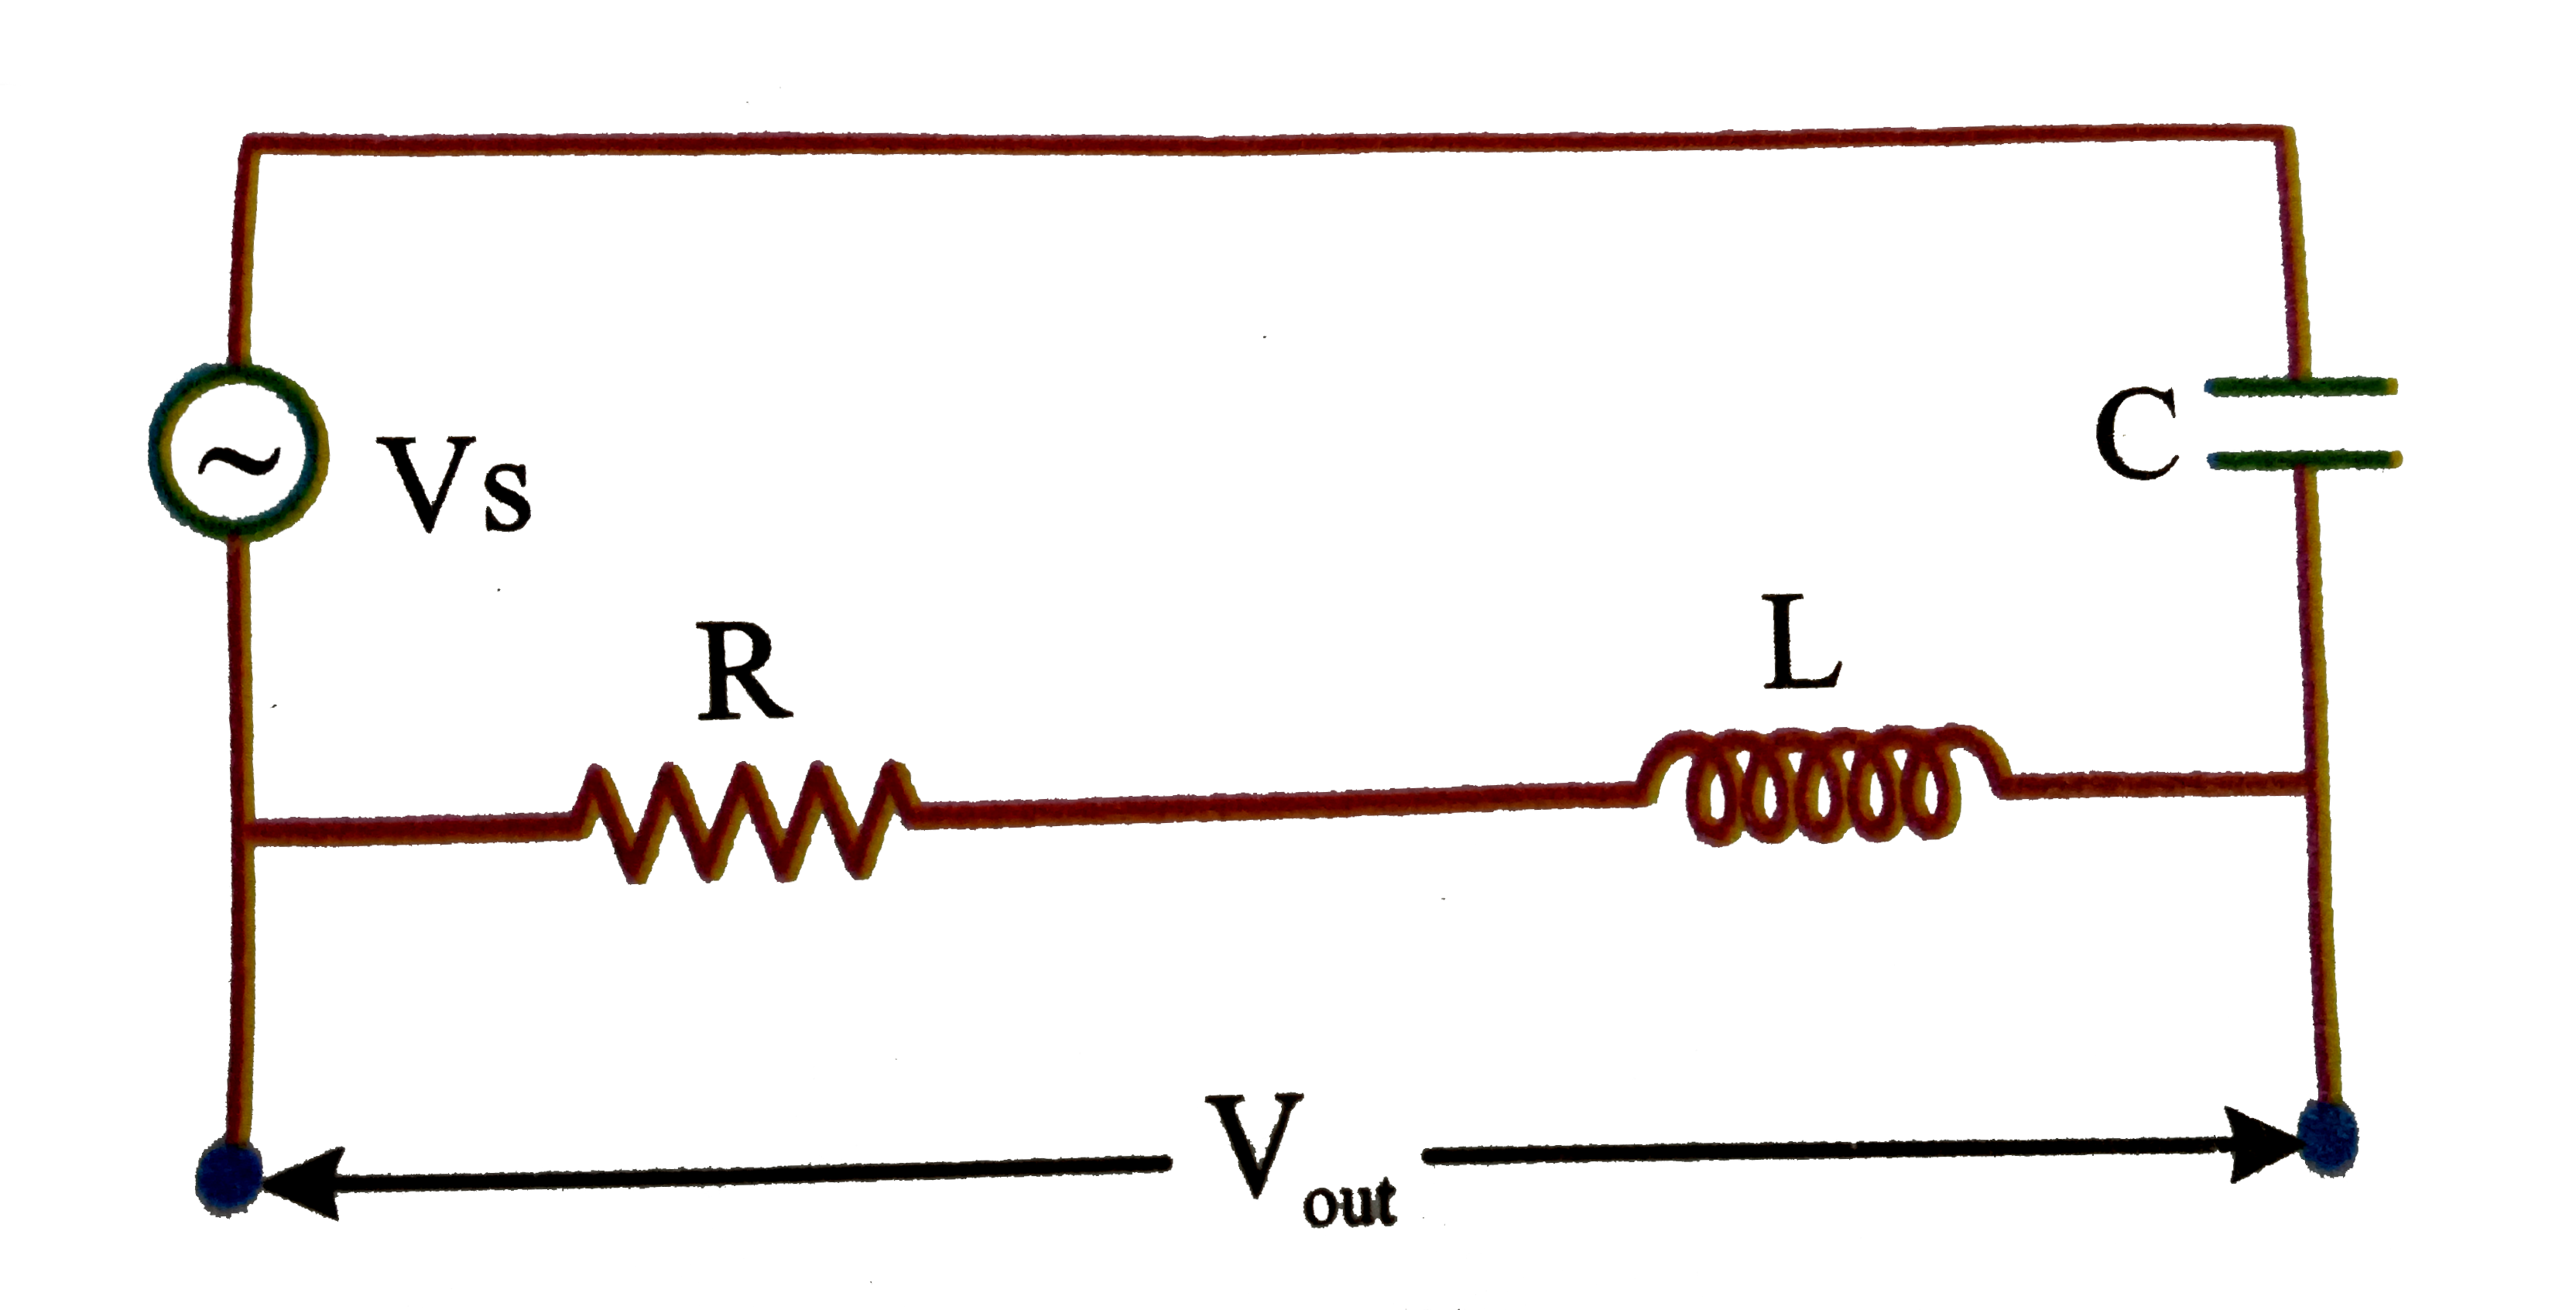 One application of L-R-C series circuit is in high pass or low pass filter, which out either the low or high frequency components of a signal. A has pass filter is shown in figure where the output voltage is taken across the L-R where L-R combination represents and inductive coil that also has resistance due to the large length of the wire in the coil.      Find the ratio V(